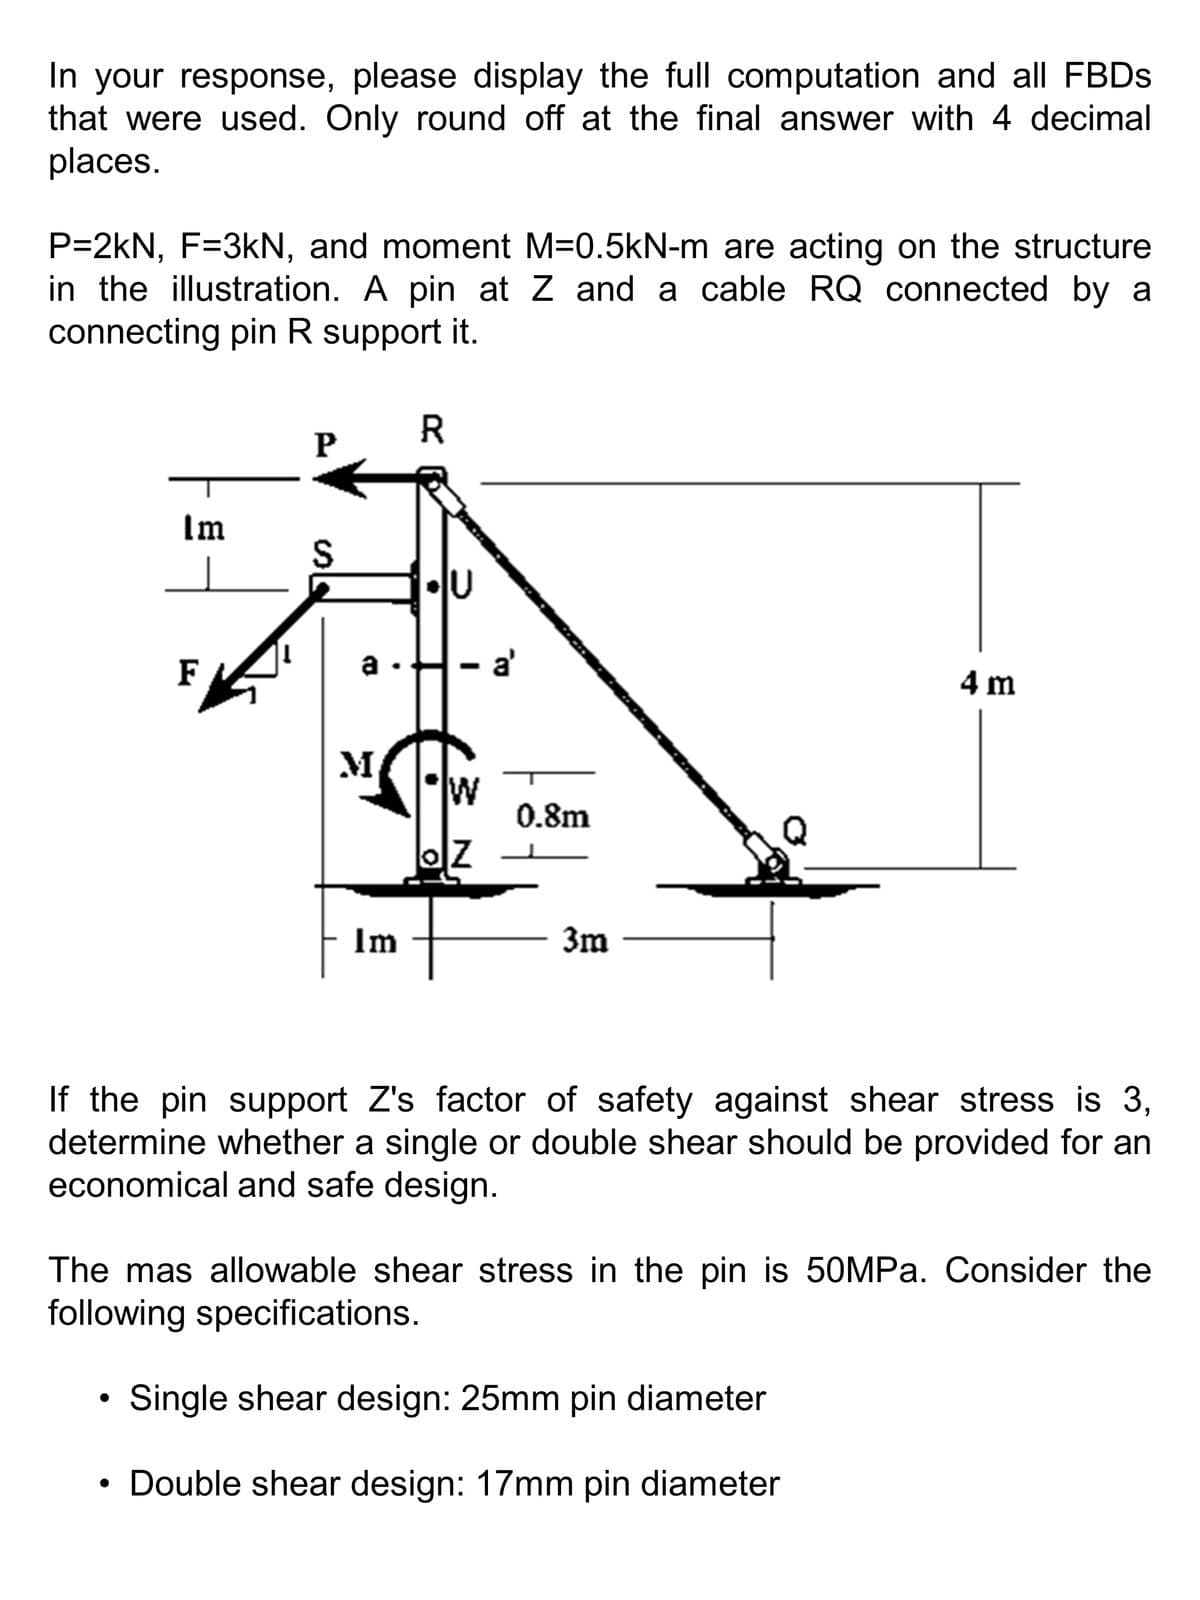 In your response, please display the full computation and all FBDs
that were used. Only round off at the final answer with 4 decimal
places.
P=2kN, F=3kN, and moment M=0.5kN-m are acting on the structure
in the illustration. A pin at Z and a cable RQ connected by a
connecting pin R support it.
Im
●
F
●
P
S
TO
M
Im
R
lu
W
OZ
a'
0.8m
3m
If the pin support Z's factor of safety against shear stress is 3,
determine whether a single or double shear should be provided for an
economical and safe design.
4 m
The mas allowable shear stress in the pin is 50MPa. Consider the
following specifications.
Single shear design: 25mm pin diameter
Double shear design: 17mm pin diameter